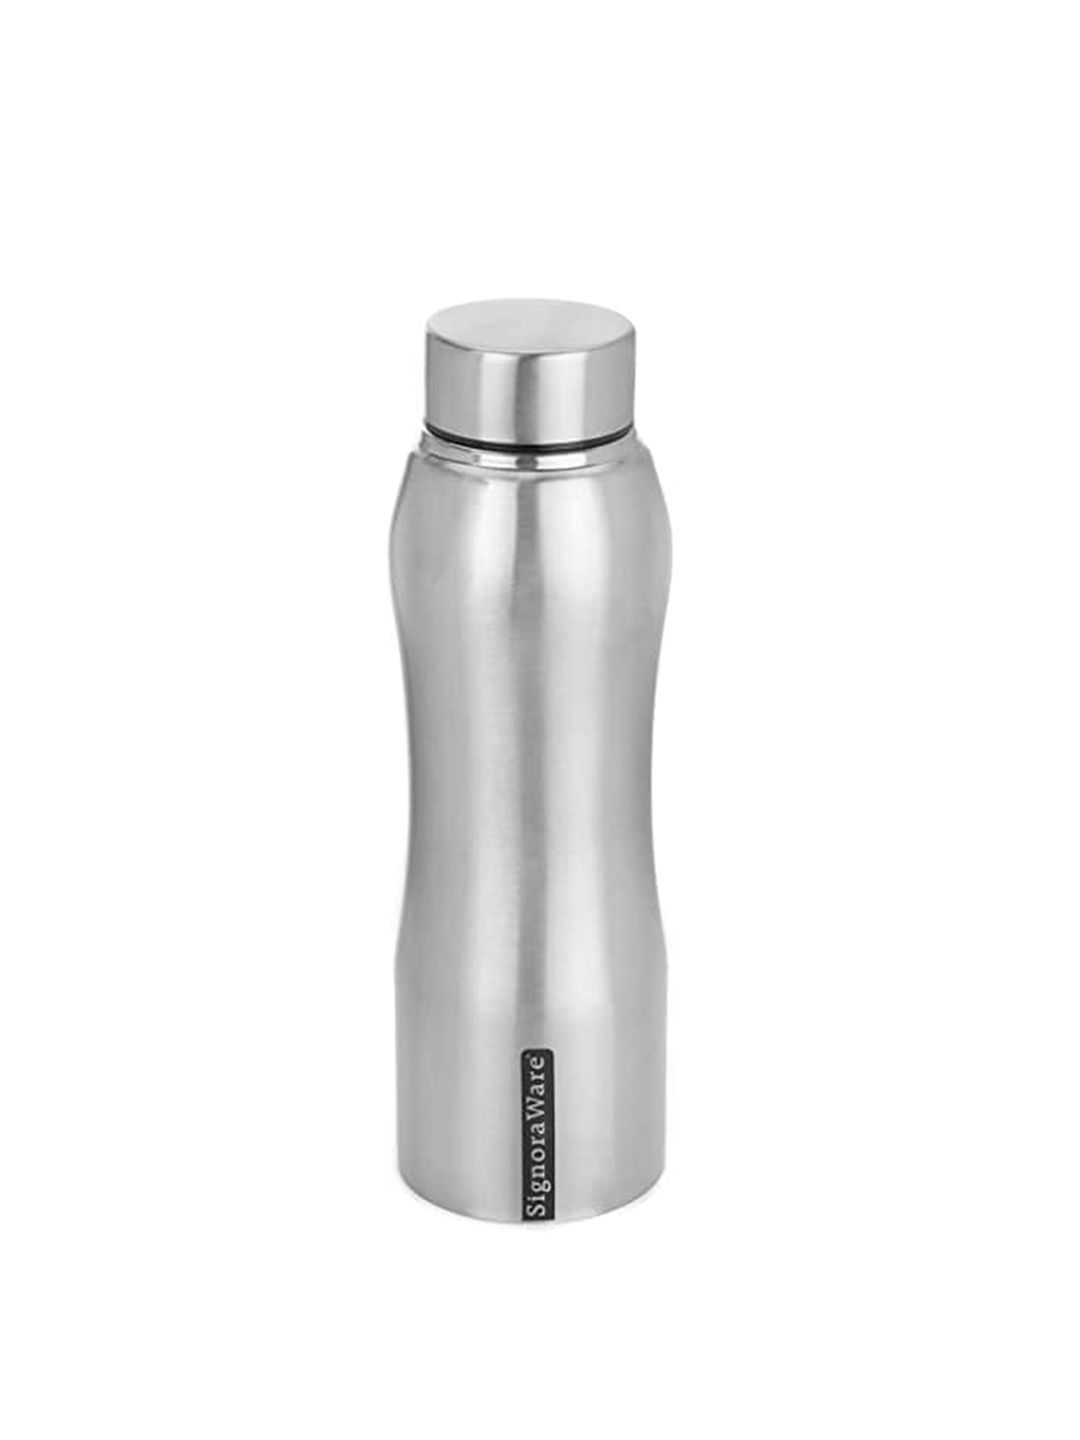 SignoraWare Silver-Toned Solid Water Bottle 1000 Ml Price in India